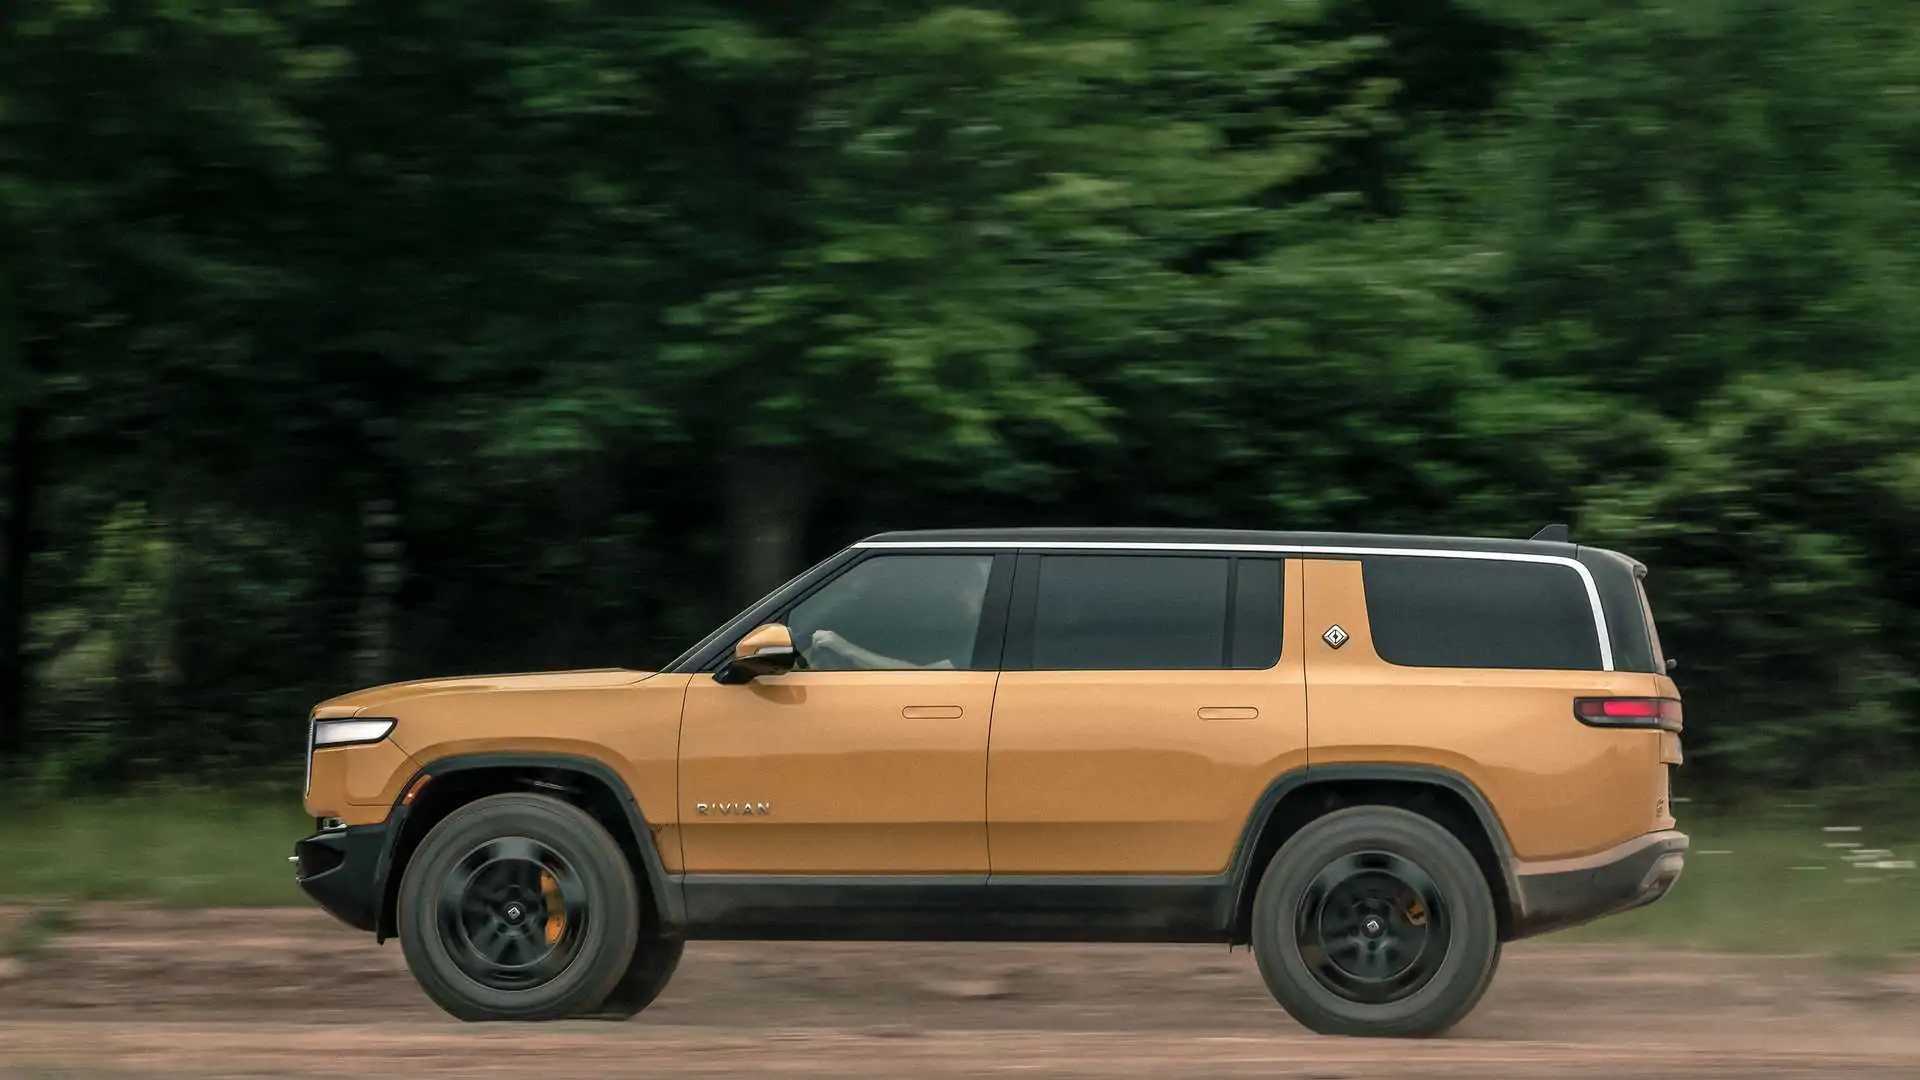 rivian could launch 1,000 hp+ r1t, r1s variants in 2024